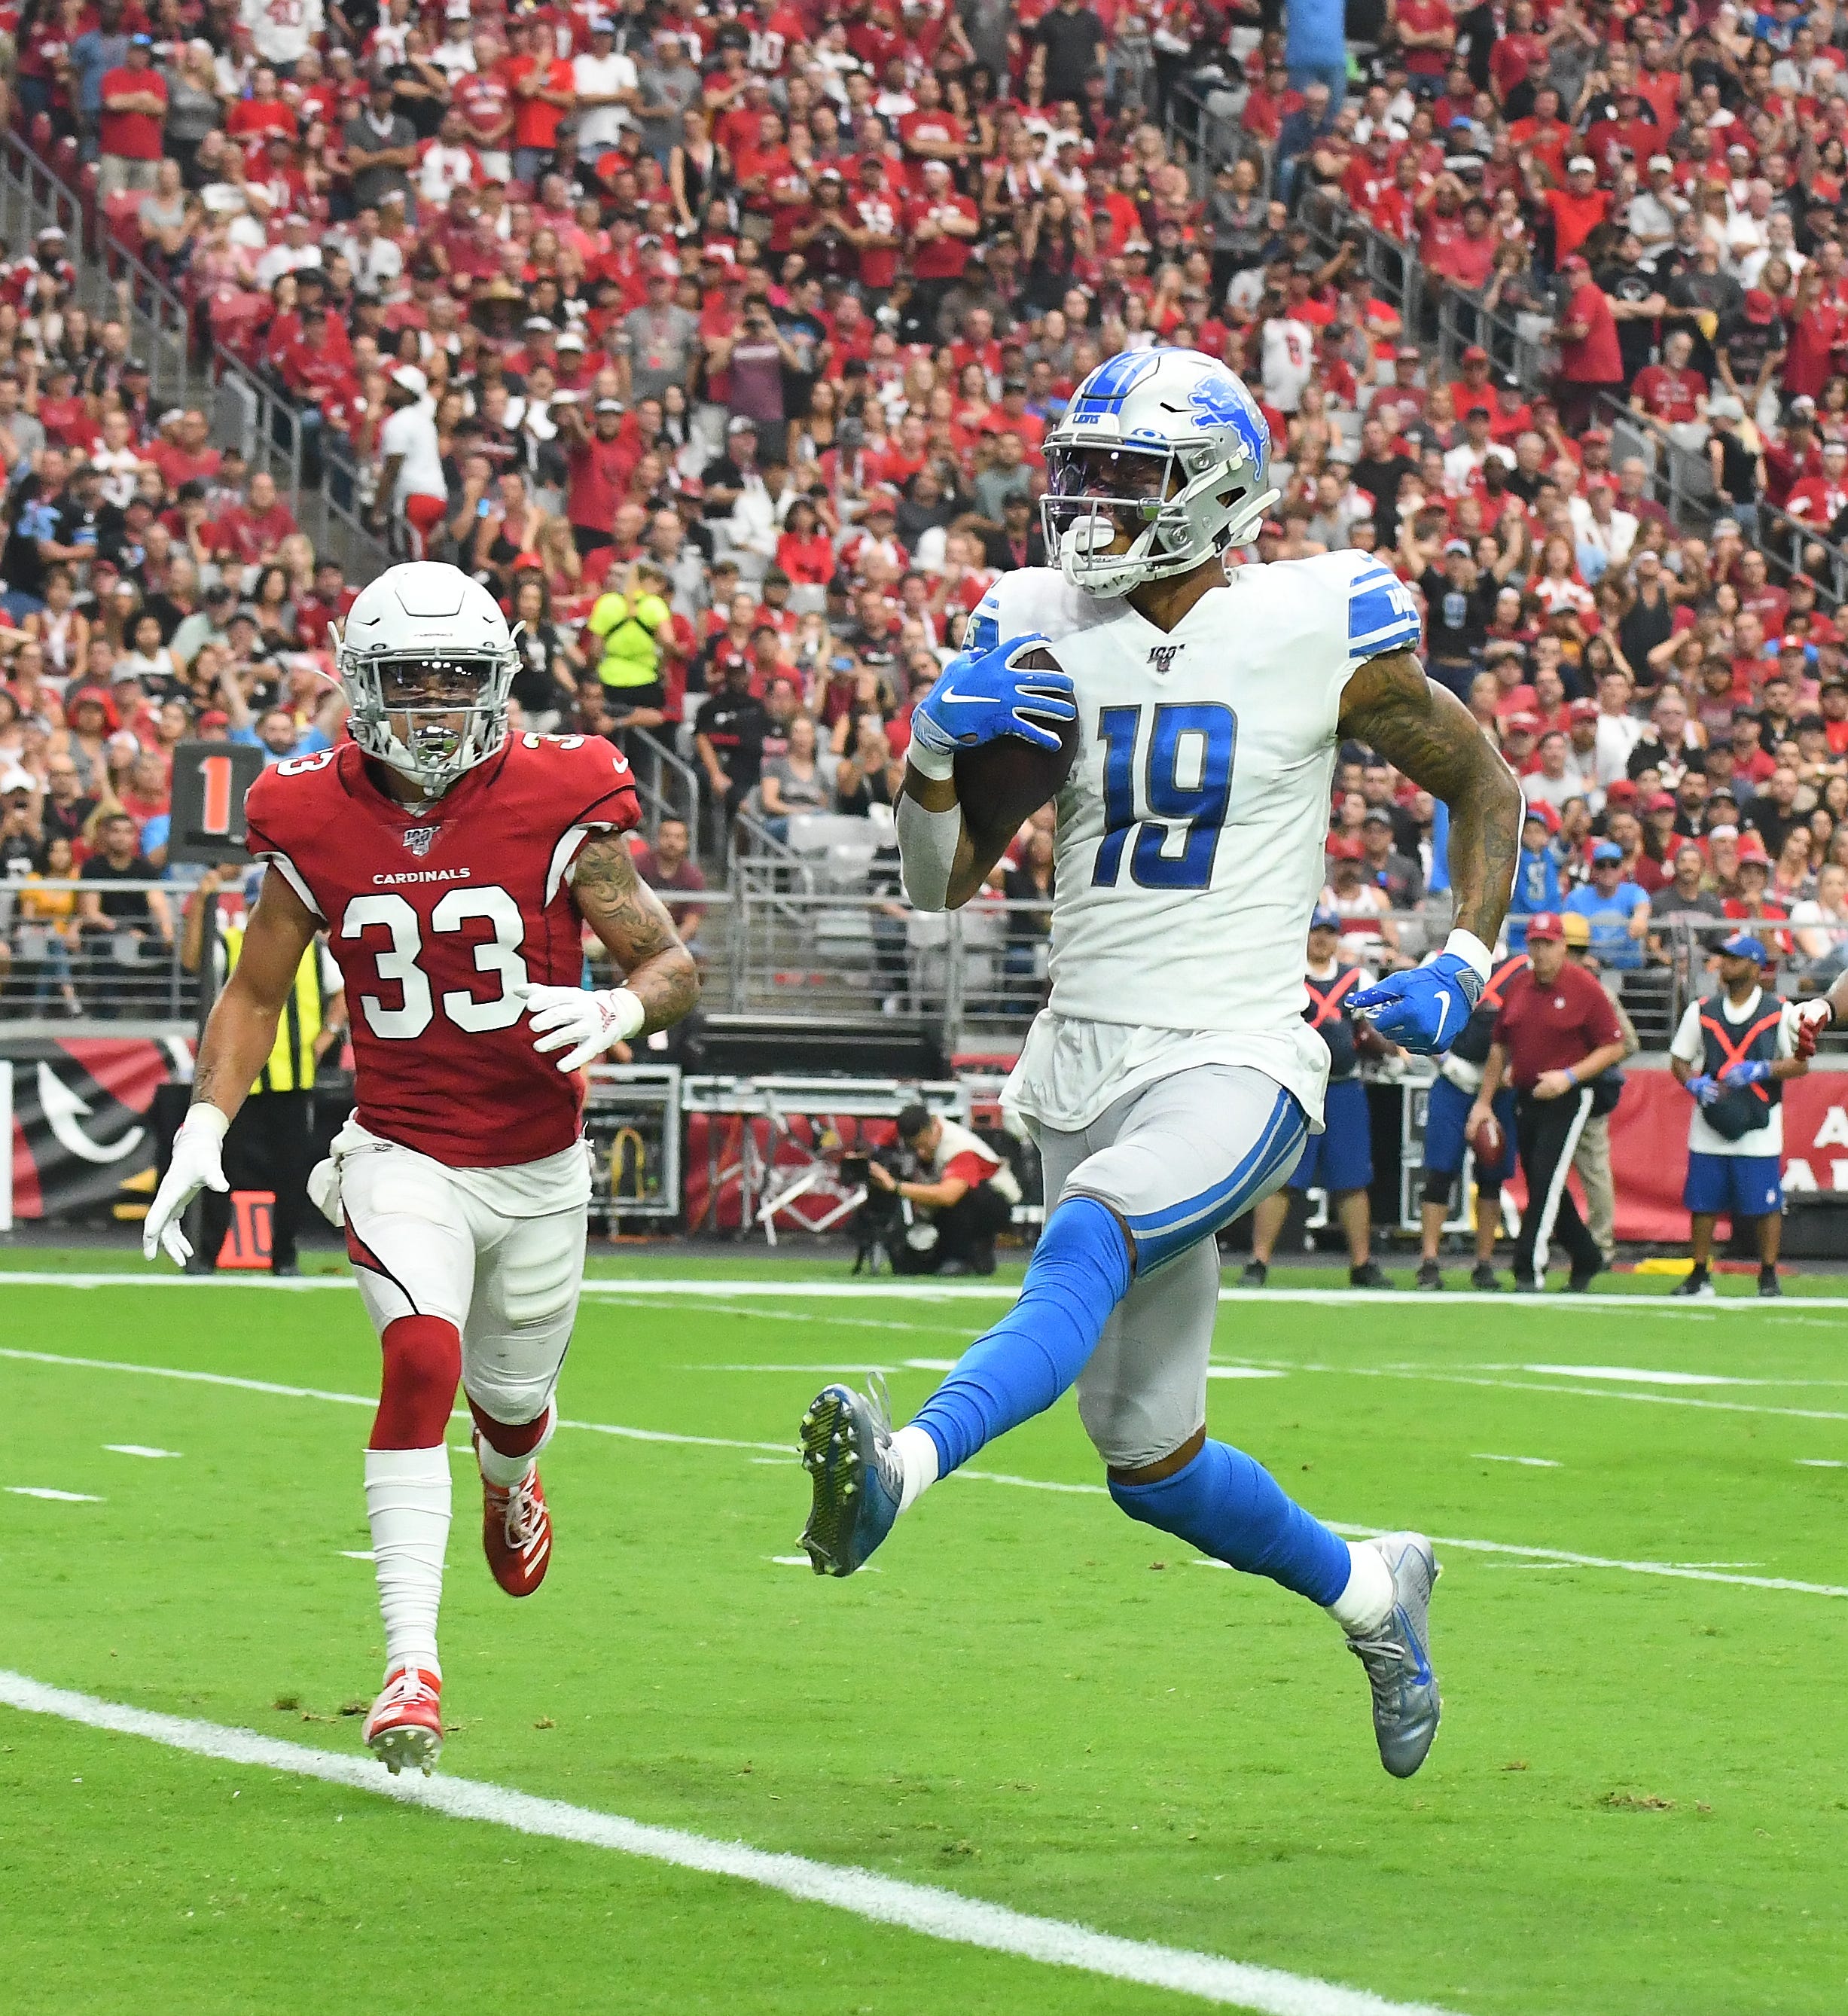 Kenny Golladay, wide receiver: Golladay led the NFL in touchdown receptions, while pacing the Lions with 1,190 yards on an impressive 18.3 yards per grab. If you’re looking for an area where he needs to improve, the third-year receiver only caught 56 percent of the throws his direction, while many of the league’s top options haul in closer to seven out of 10 targets their way. Grade: A-